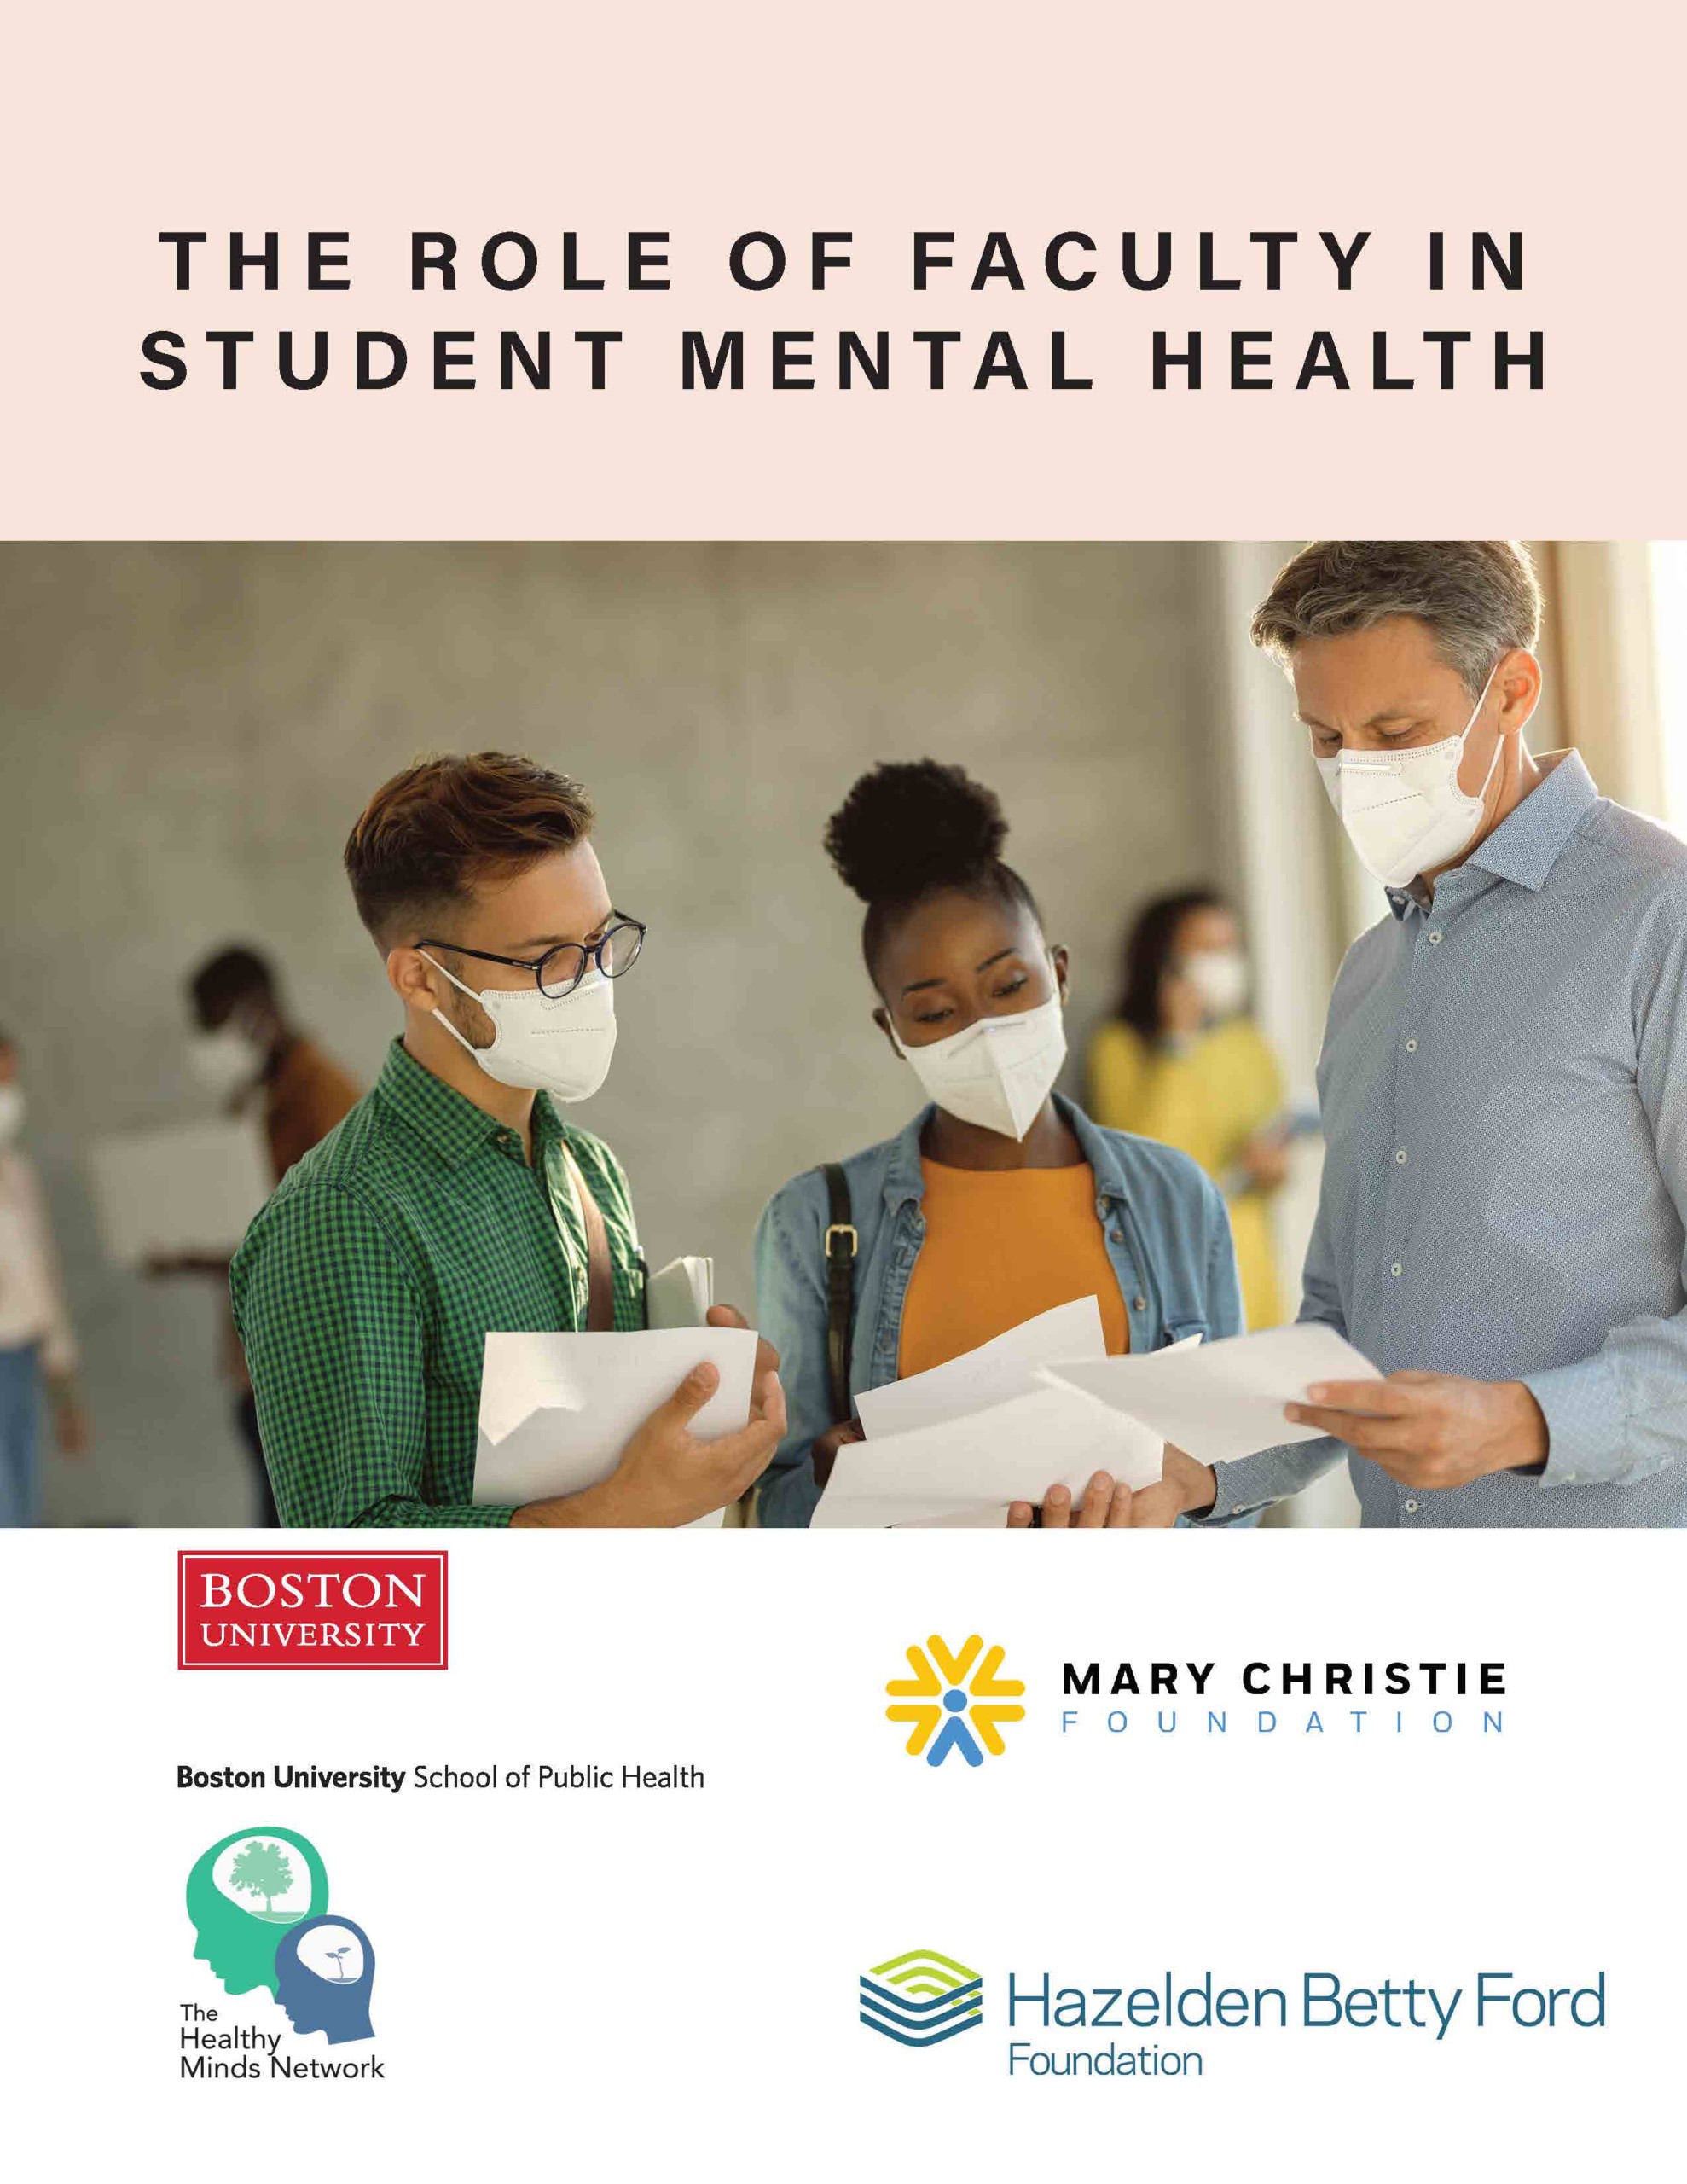 The Role of Faculty in Student Mental Health